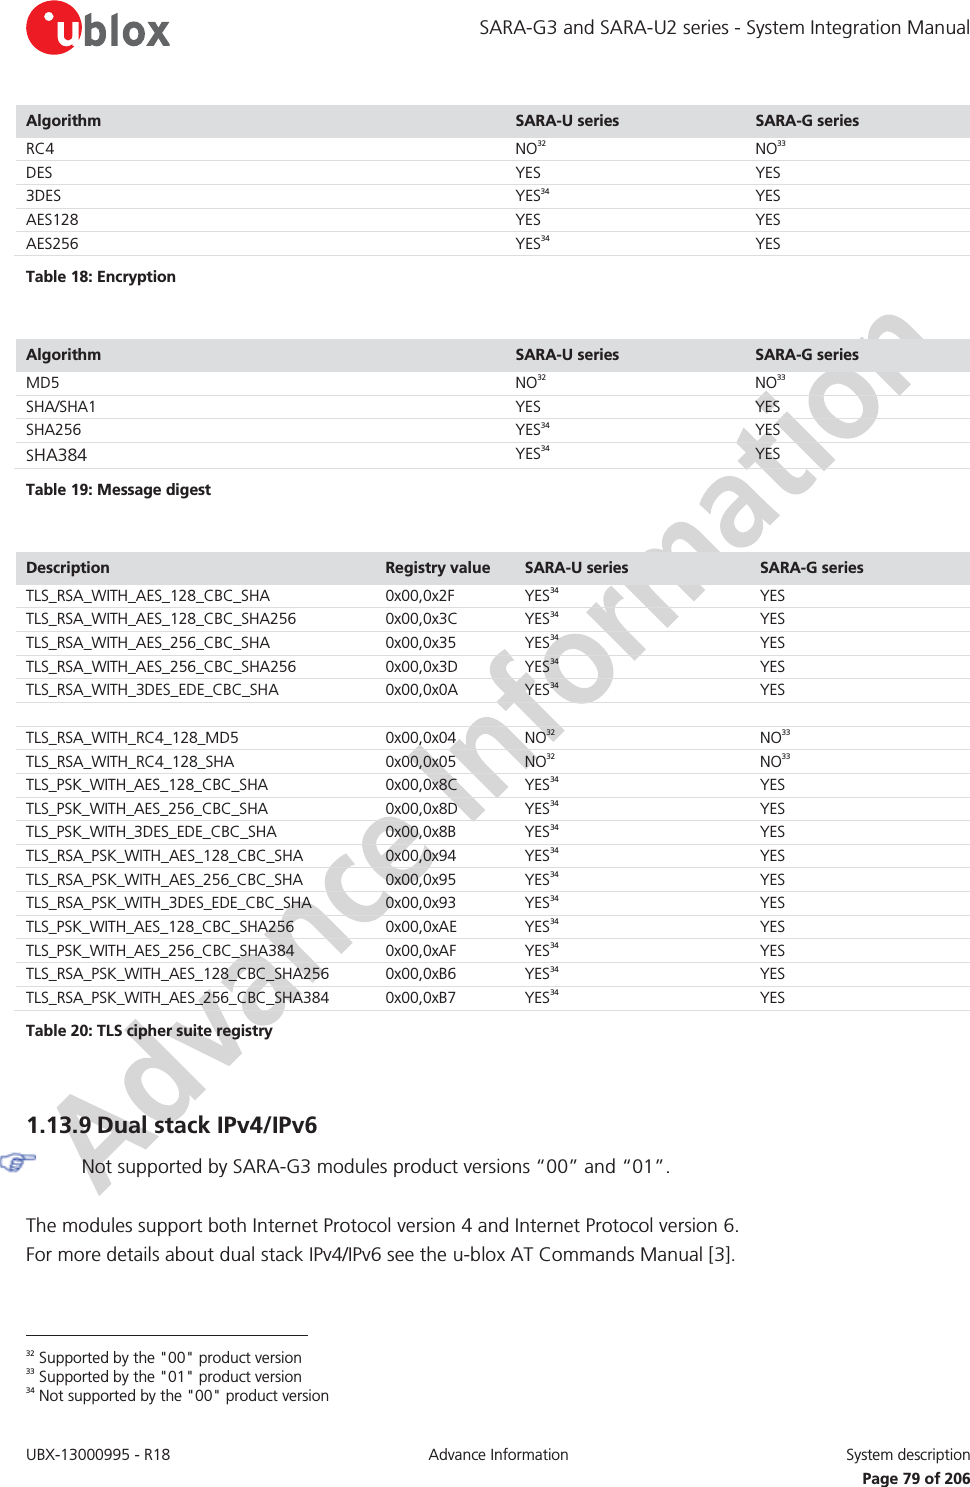 SARA-G3 and SARA-U2 series - System Integration Manual UBX-13000995 - R18  Advance Information  System description   Page 79 of 206 Algorithm  SARA-U series  SARA-G series RC4 NO32 NO33 DES YES YES 3DES YES34 YES AES128 YES YES AES256 YES34 YES Table 18: Encryption  Algorithm  SARA-U series  SARA-G series MD5 NO32 NO33 SHA/SHA1 YES YES SHA256 YES34 YES SHA384 YES34 YES Table 19: Message digest  Description  Registry value  SARA-U series  SARA-G series TLS_RSA_WITH_AES_128_CBC_SHA 0x00,0x2F YES34 YES TLS_RSA_WITH_AES_128_CBC_SHA256 0x00,0x3C YES34 YES TLS_RSA_WITH_AES_256_CBC_SHA 0x00,0x35 YES34 YES TLS_RSA_WITH_AES_256_CBC_SHA256 0x00,0x3D YES34 YES TLS_RSA_WITH_3DES_EDE_CBC_SHA 0x00,0x0A YES34 YES     TLS_RSA_WITH_RC4_128_MD5 0x00,0x04 NO32 NO33 TLS_RSA_WITH_RC4_128_SHA 0x00,0x05 NO32 NO33 TLS_PSK_WITH_AES_128_CBC_SHA 0x00,0x8C YES34 YES TLS_PSK_WITH_AES_256_CBC_SHA 0x00,0x8D YES34 YES TLS_PSK_WITH_3DES_EDE_CBC_SHA 0x00,0x8B YES34 YES TLS_RSA_PSK_WITH_AES_128_CBC_SHA 0x00,0x94 YES34 YES TLS_RSA_PSK_WITH_AES_256_CBC_SHA 0x00,0x95 YES34 YES TLS_RSA_PSK_WITH_3DES_EDE_CBC_SHA 0x00,0x93 YES34 YES TLS_PSK_WITH_AES_128_CBC_SHA256 0x00,0xAE YES34 YES TLS_PSK_WITH_AES_256_CBC_SHA384 0x00,0xAF YES34 YES TLS_RSA_PSK_WITH_AES_128_CBC_SHA256 0x00,0xB6 YES34 YES TLS_RSA_PSK_WITH_AES_256_CBC_SHA384 0x00,0xB7 YES34 YES Table 20: TLS cipher suite registry  1.13.9 Dual stack IPv4/IPv6  Not supported by SARA-G3 modules product versions “00” and “01”.  The modules support both Internet Protocol version 4 and Internet Protocol version 6. For more details about dual stack IPv4/IPv6 see the u-blox AT Commands Manual [3].                                                        32 Supported by the &quot;00&quot; product version 33 Supported by the &quot;01&quot; product version 34 Not supported by the &quot;00&quot; product version 